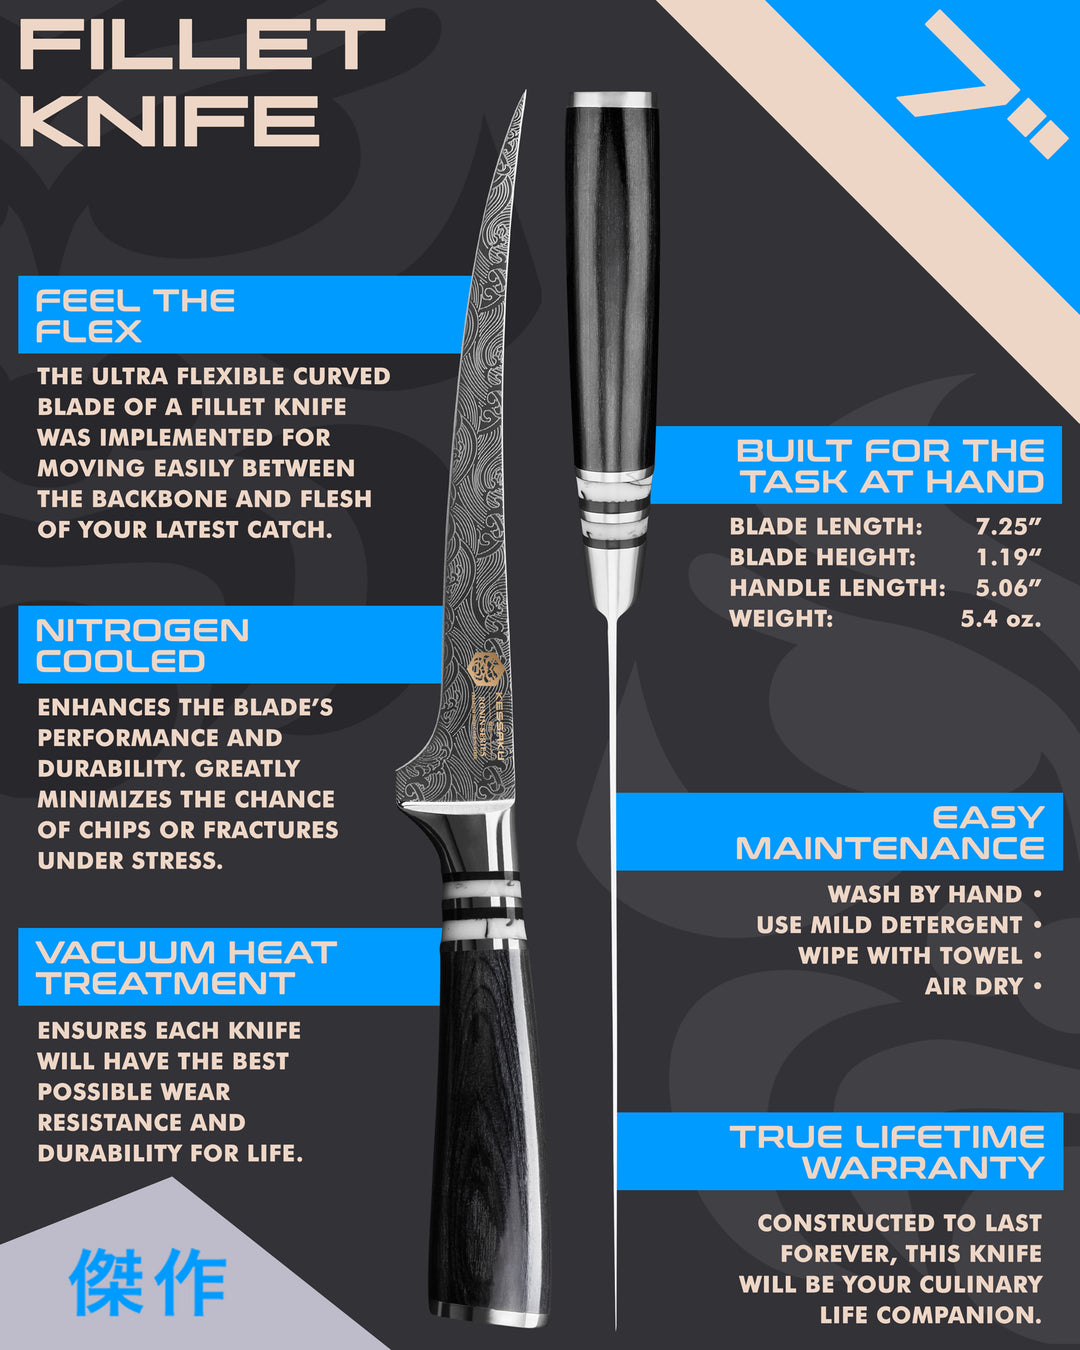 Kessaku Ronin Series Fillet Knife uses, dimensions, maintenance, warranty info, and additional blade treatments